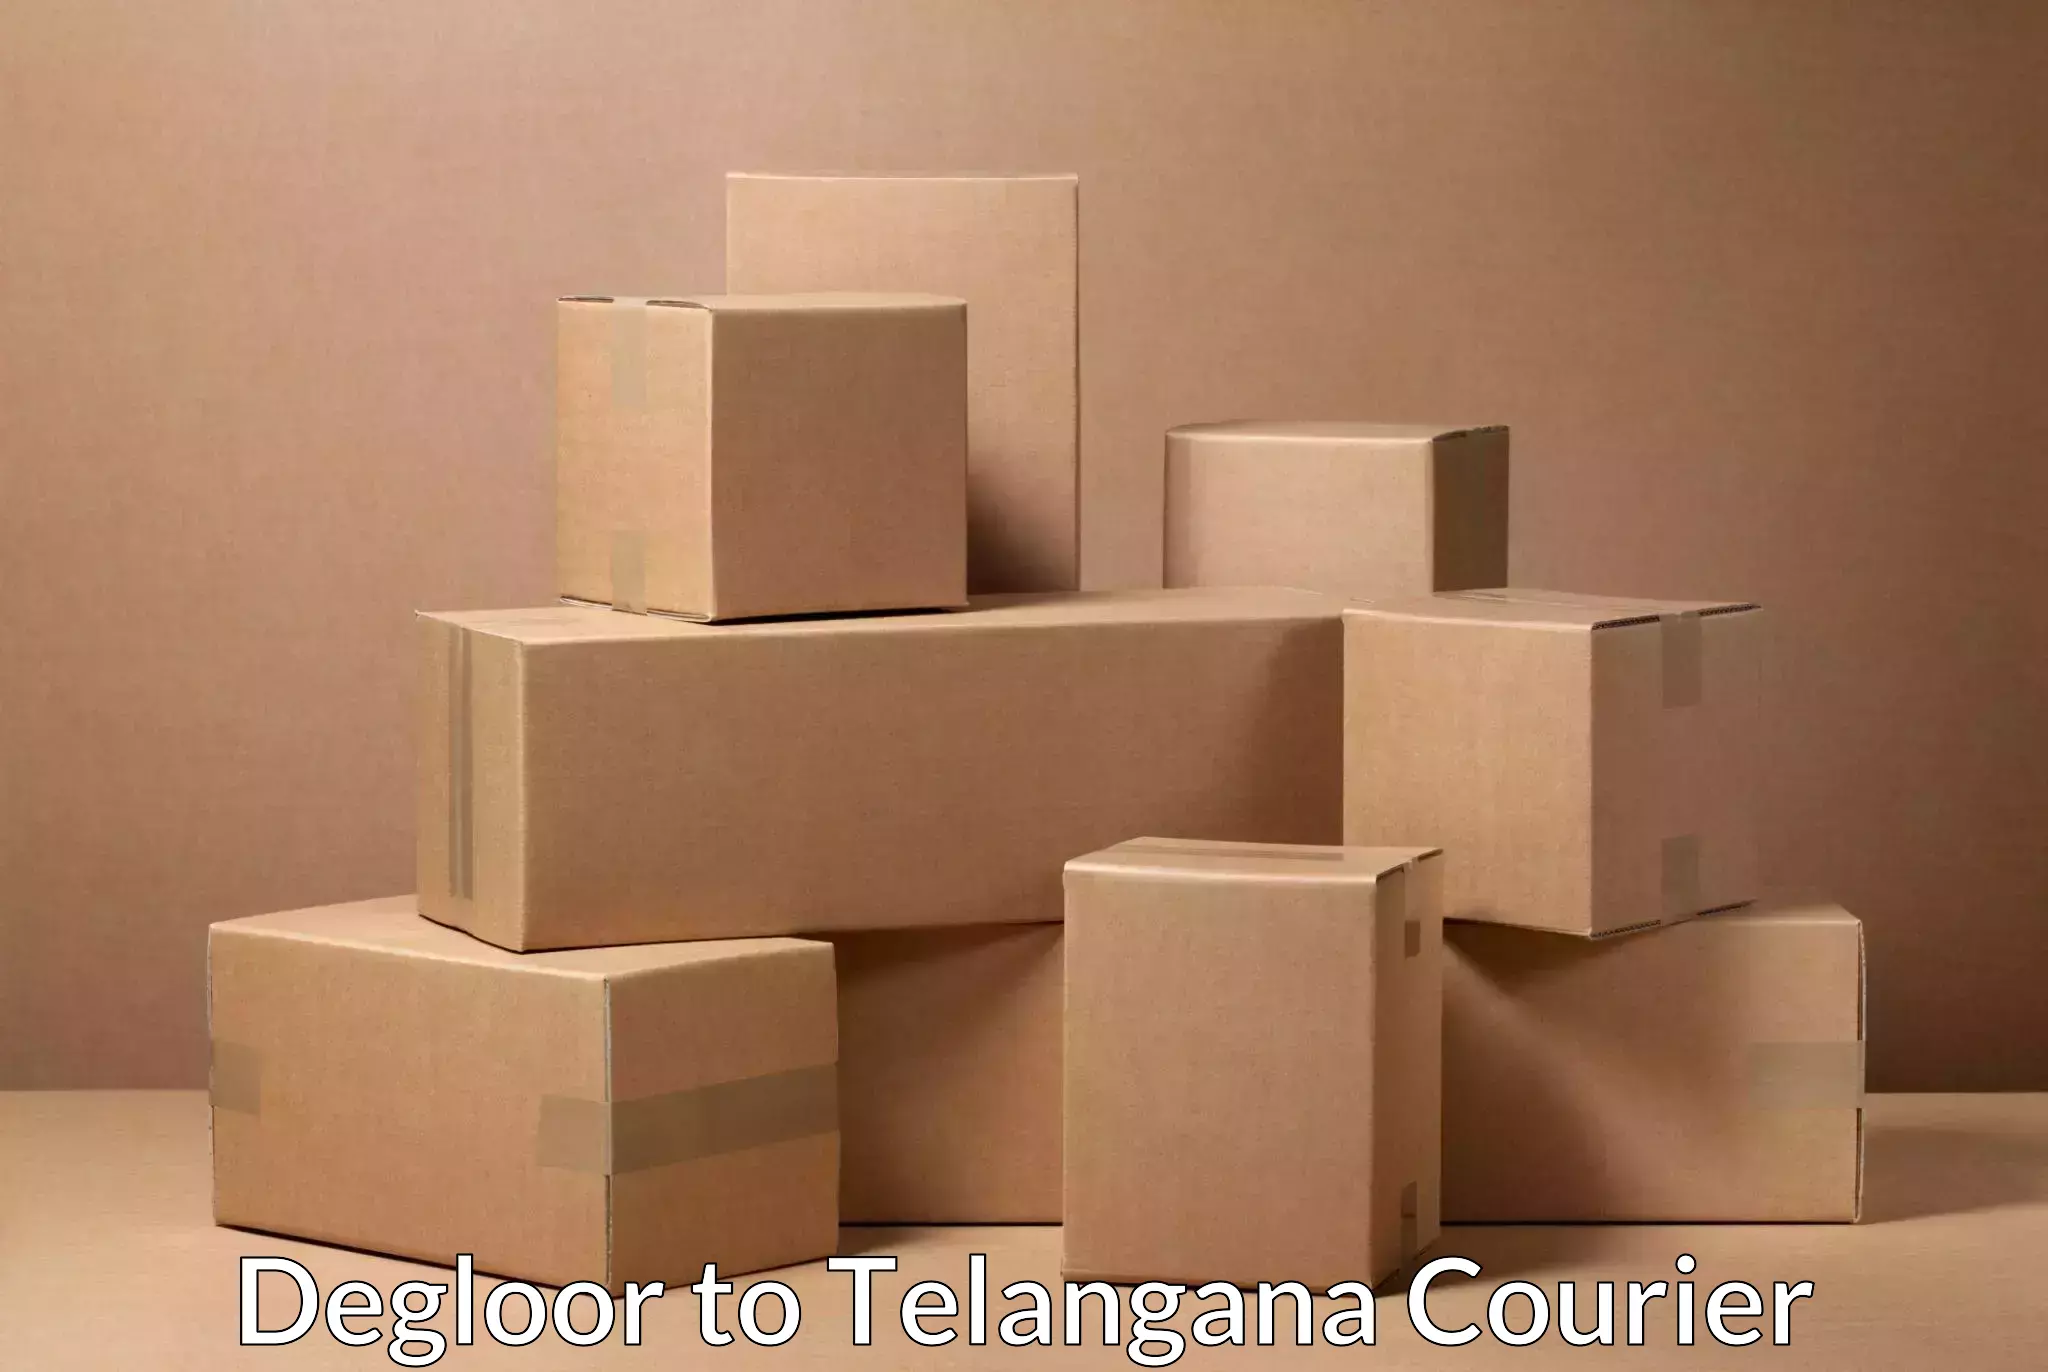 Courier service innovation Degloor to Jangaon